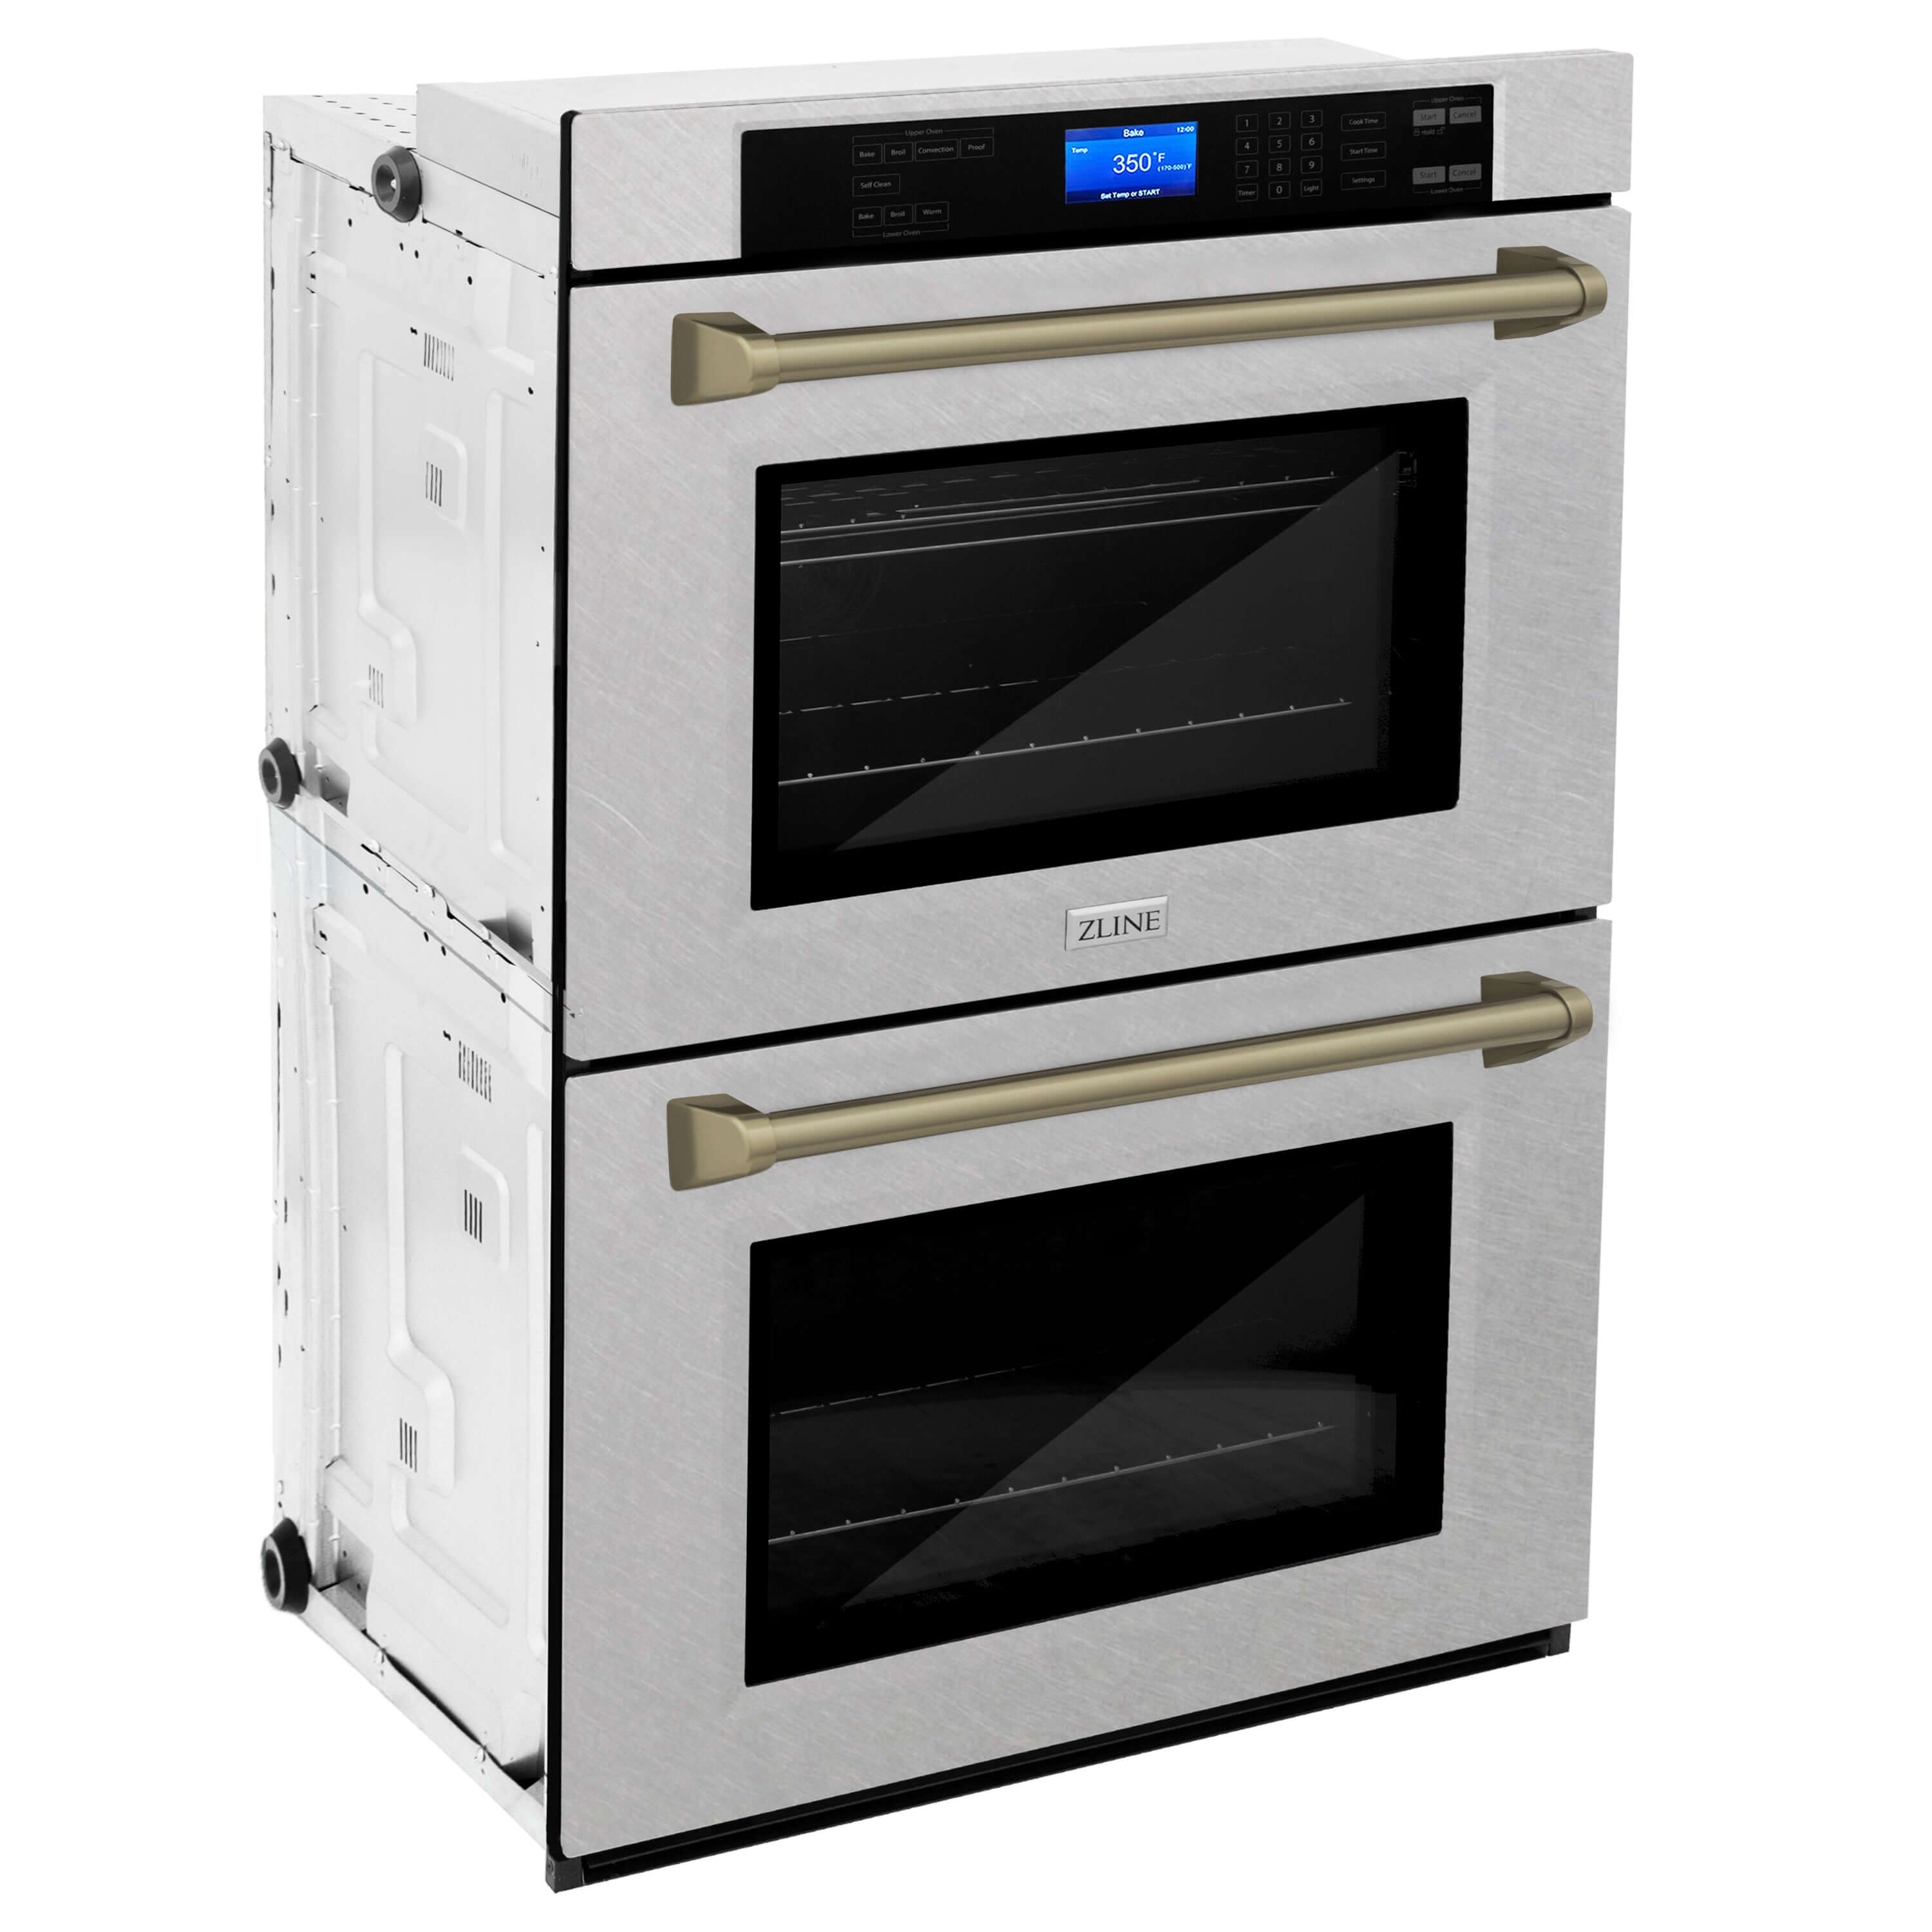 ZLINE Autograph Edition 30 in. Electric Double Wall Oven with Self Clean and True Convection in DuraSnow® Stainless Steel and Champagne Bronze Accents (AWDSZ-30-CB) side, oven closed.